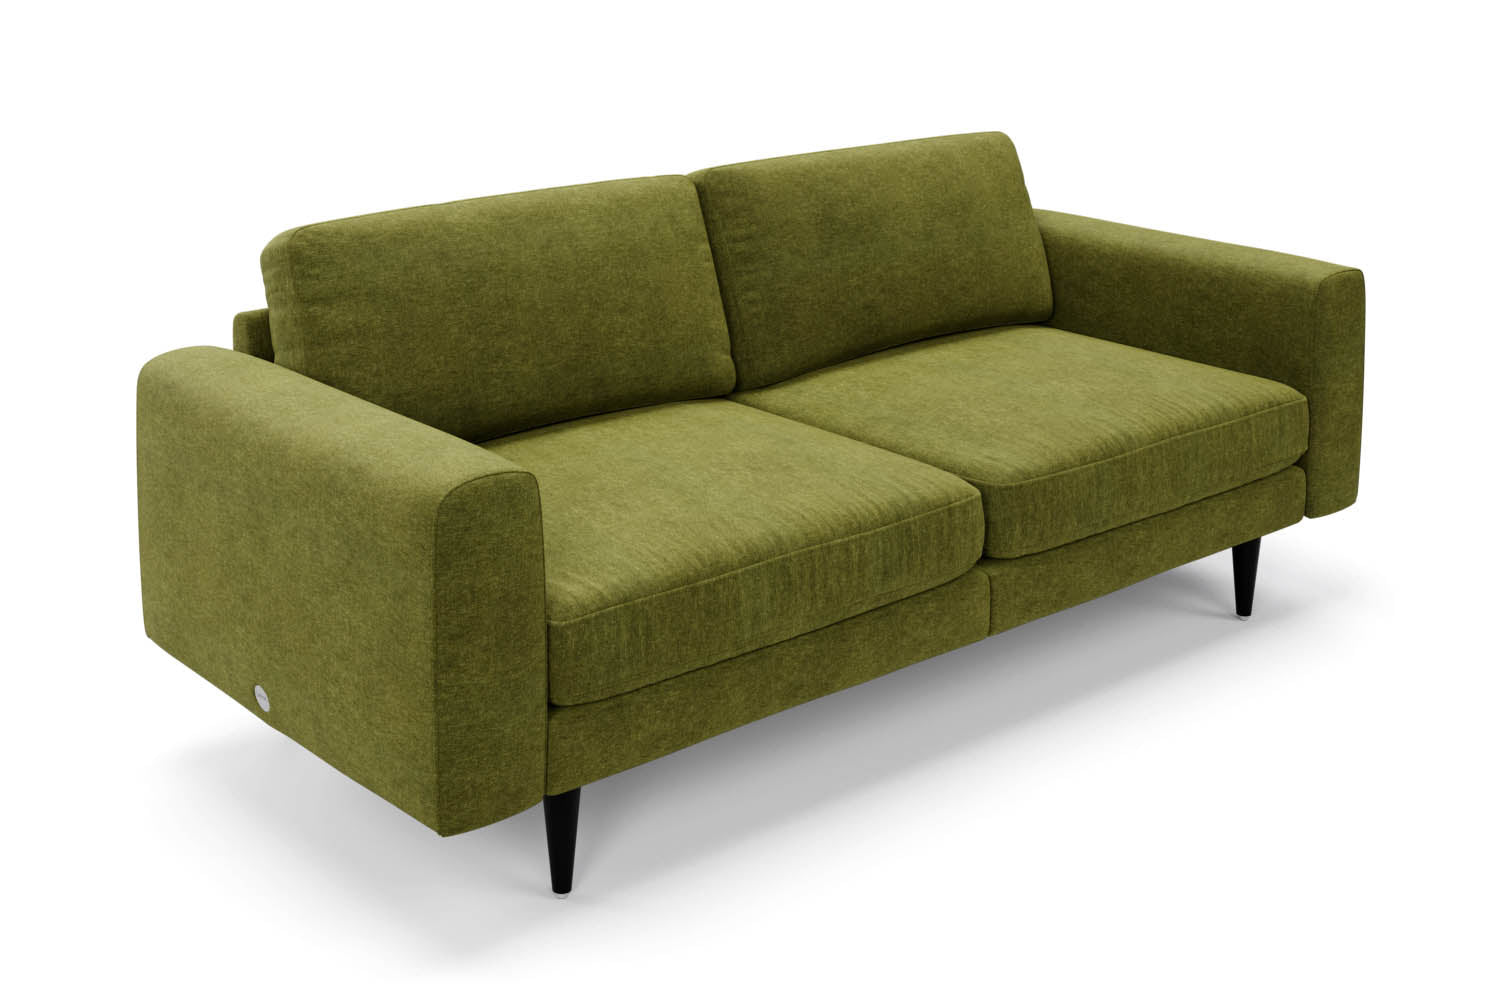 The Big Chill 3 Seater Sofa in Moss Chenille with black legs